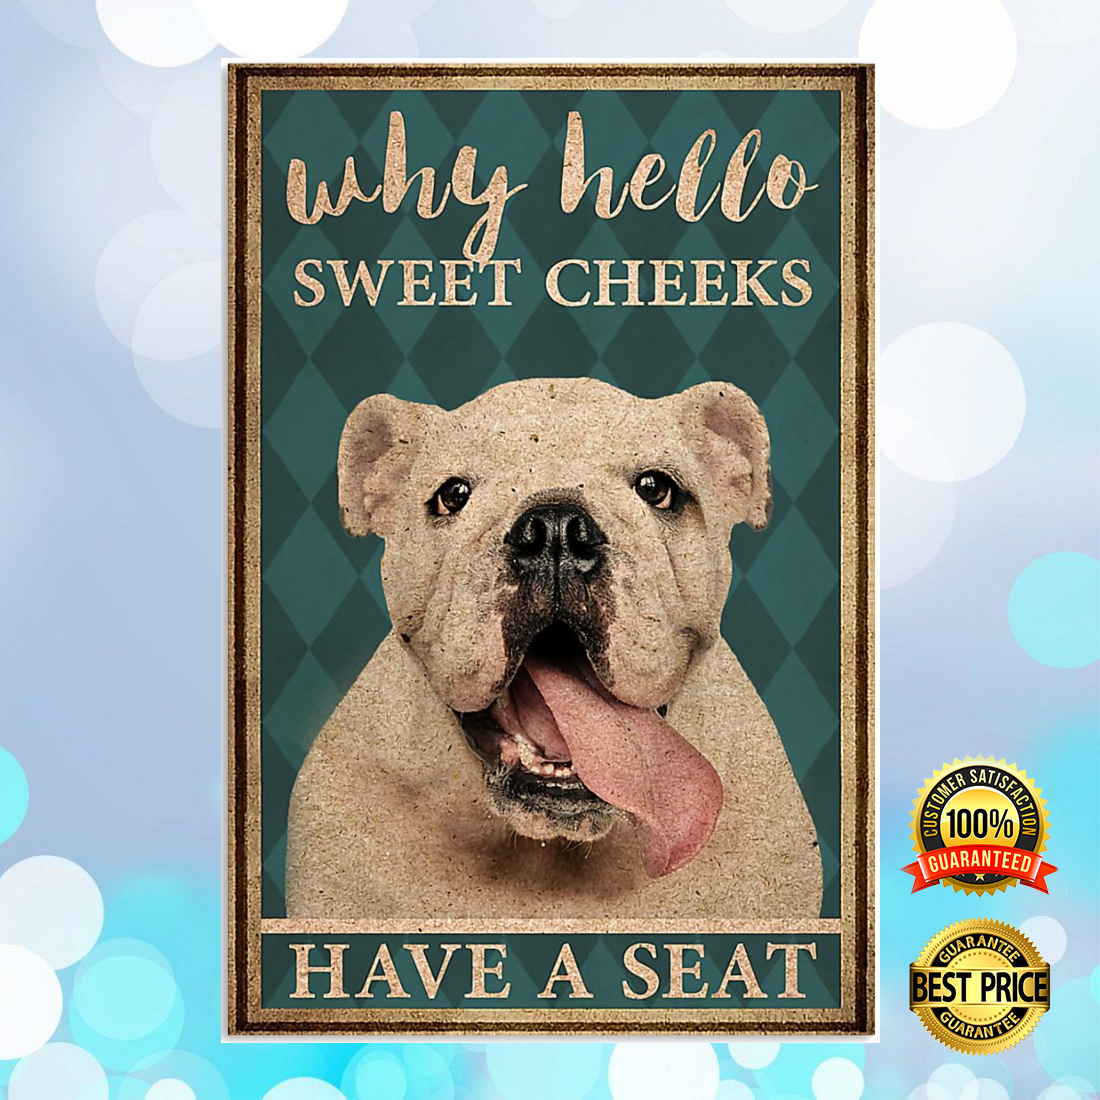 Bulldog why hello sweet cheeks have a seat poster 5